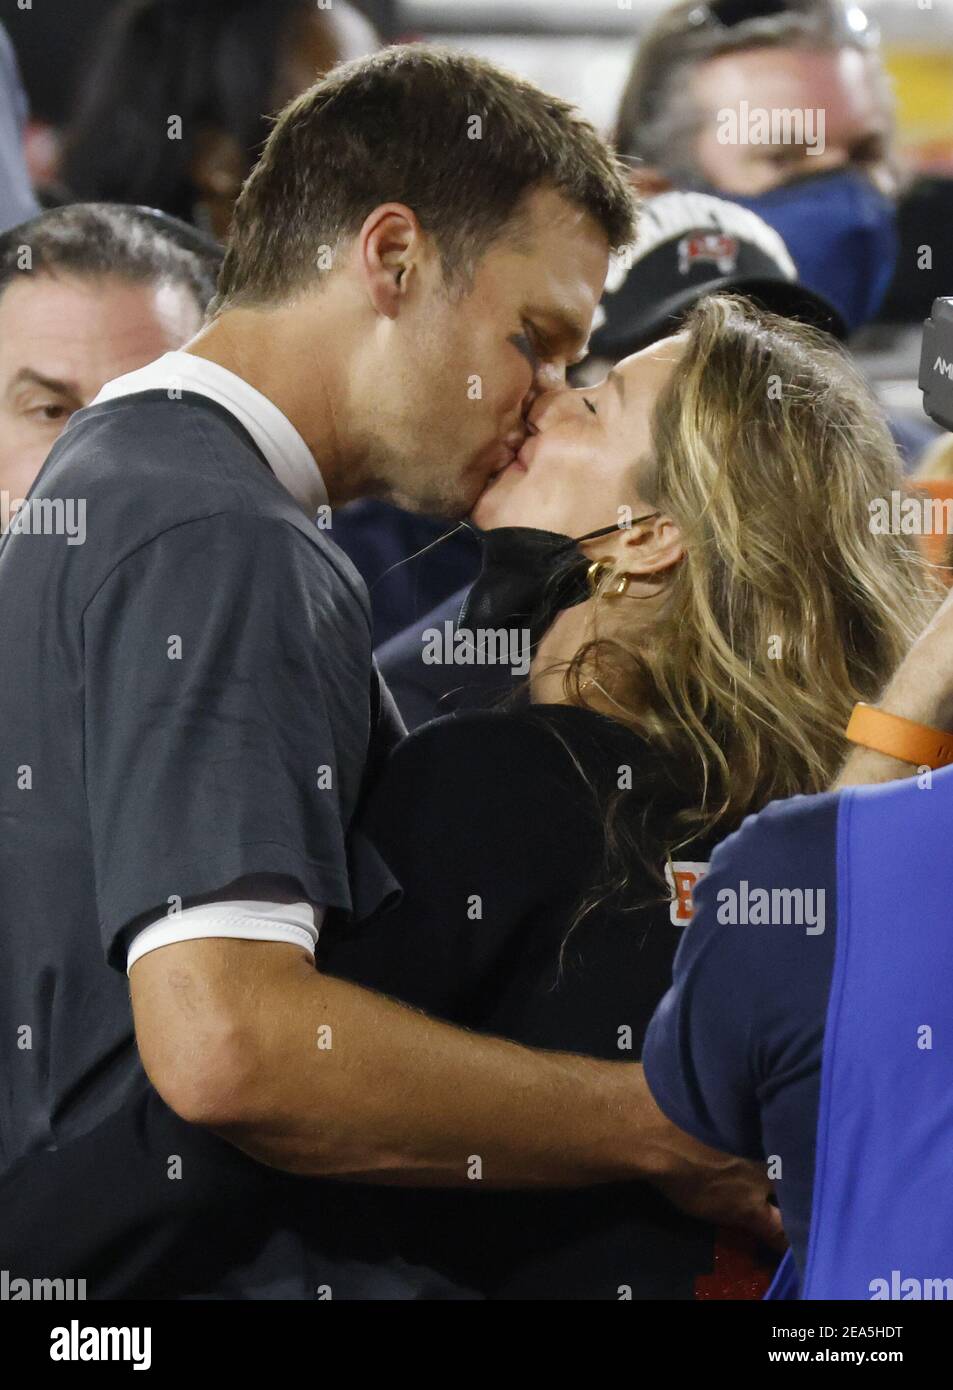 Tampa, United States. 07th Feb, 2021. Tampa Bay Buccaneers quarterback Tom Brady  kisses his wife Gisele Bundchen as he celebrates his Super Bowl LV victory  over the Kansas City Chiefs at Raymond